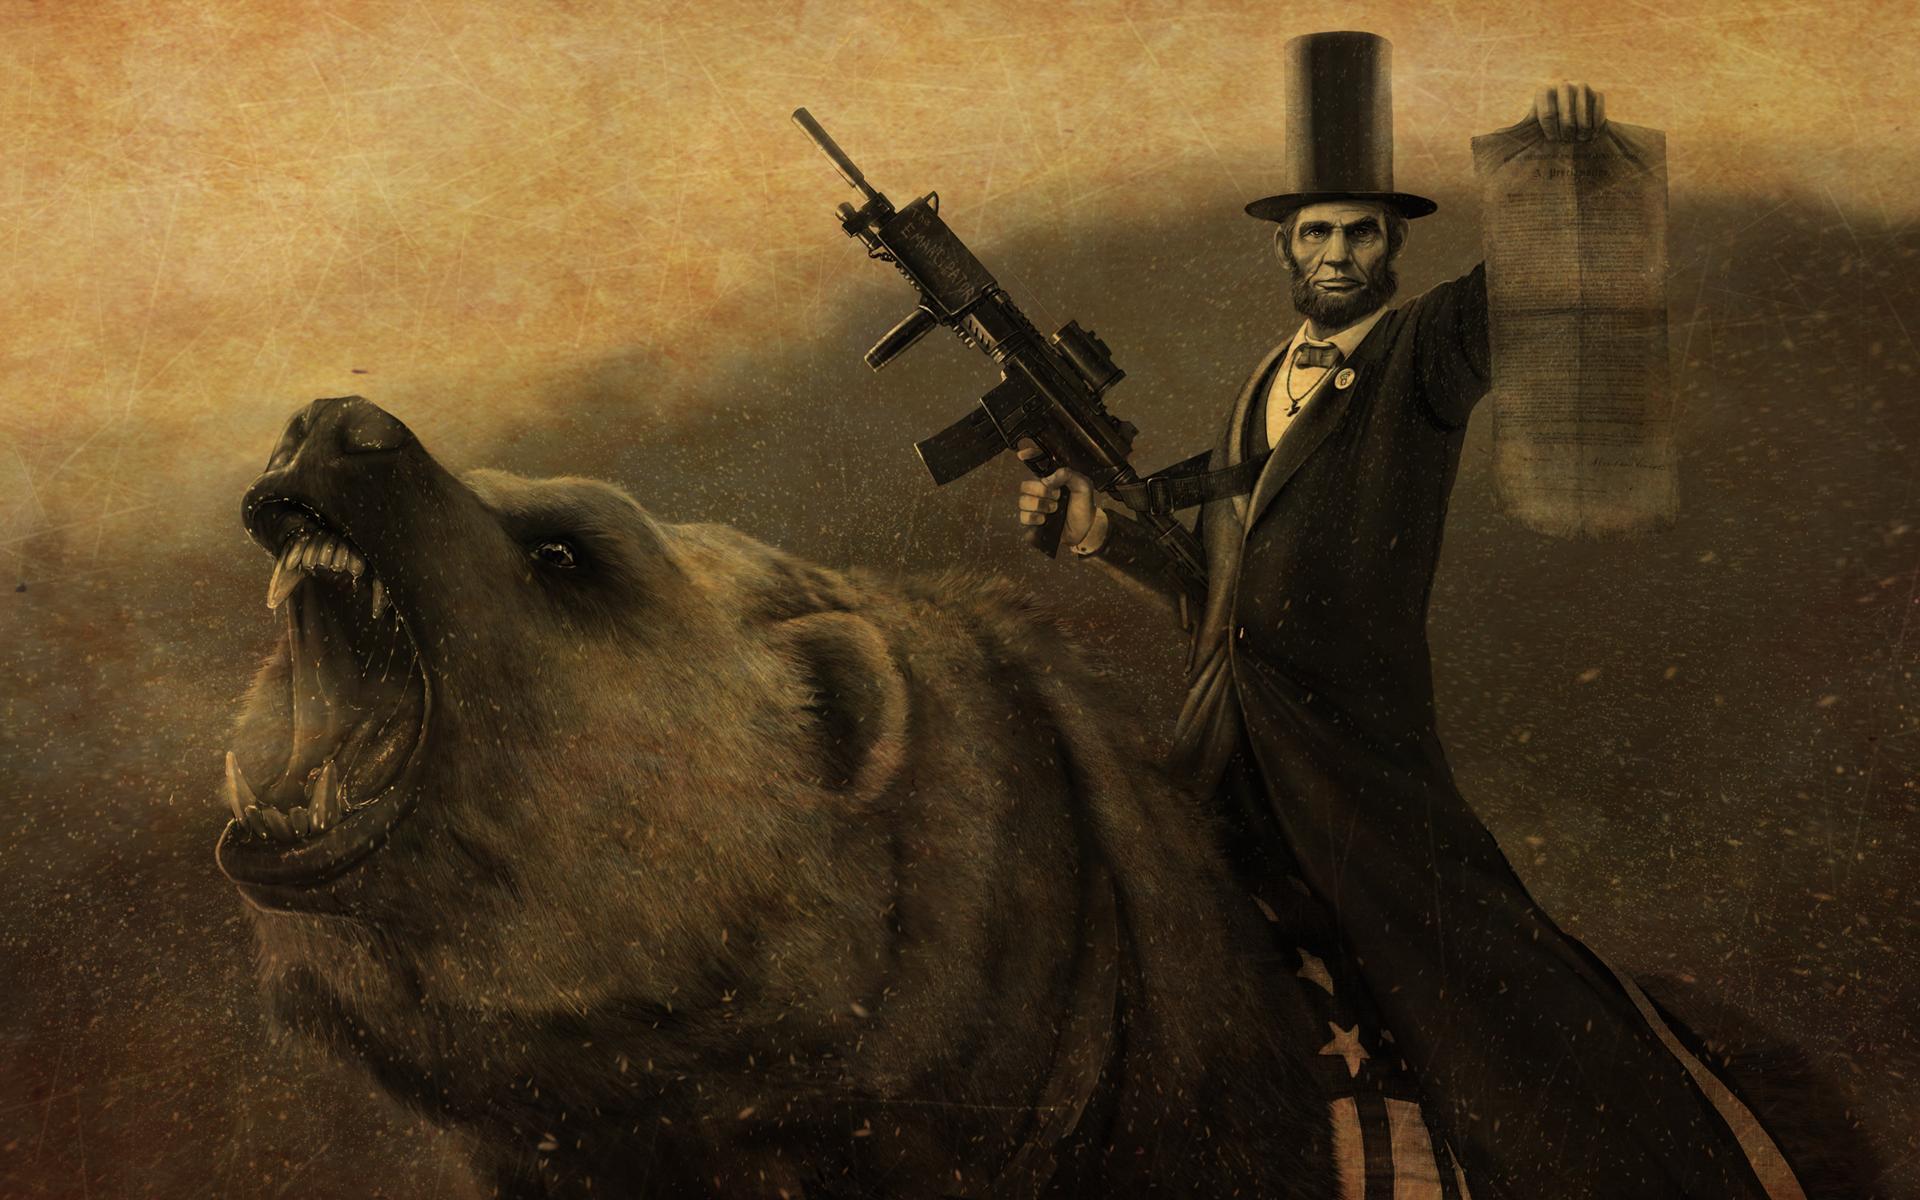 Only Baberaham Lincoln could ride a bear.with a flag saddle